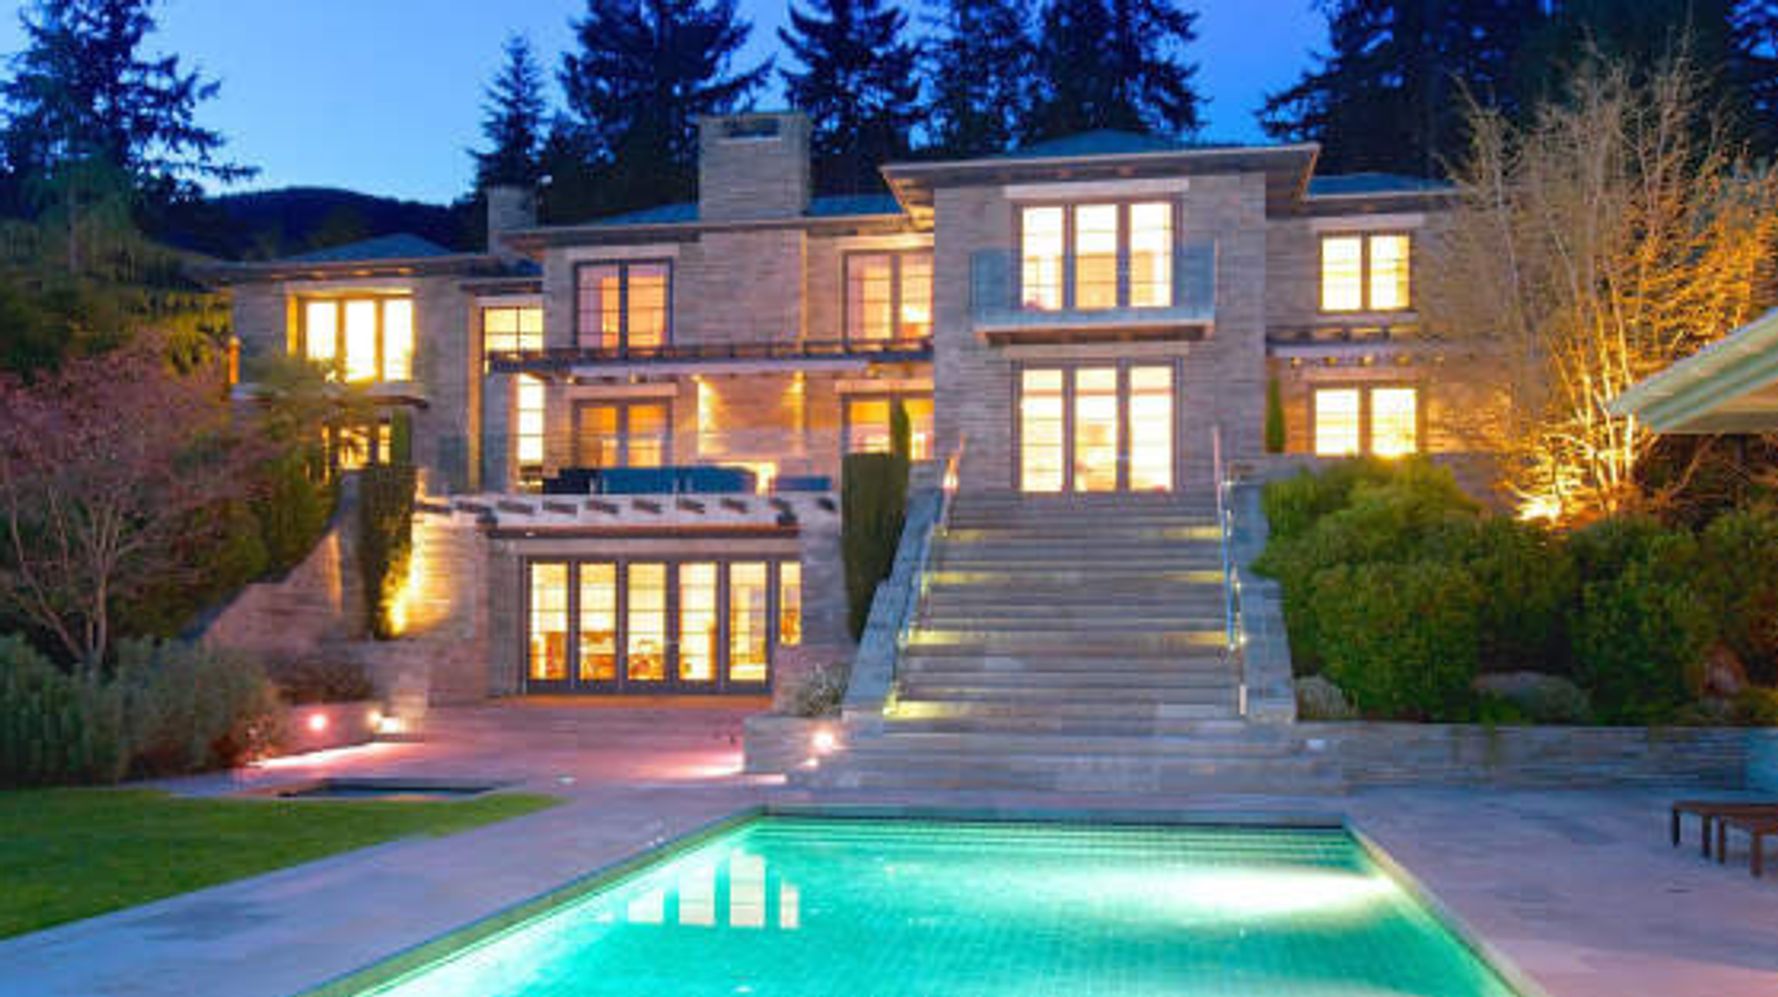 Vancouver Real Estate: Jaw-Dropping West Van Mansion For Sale (PHOTOS ...